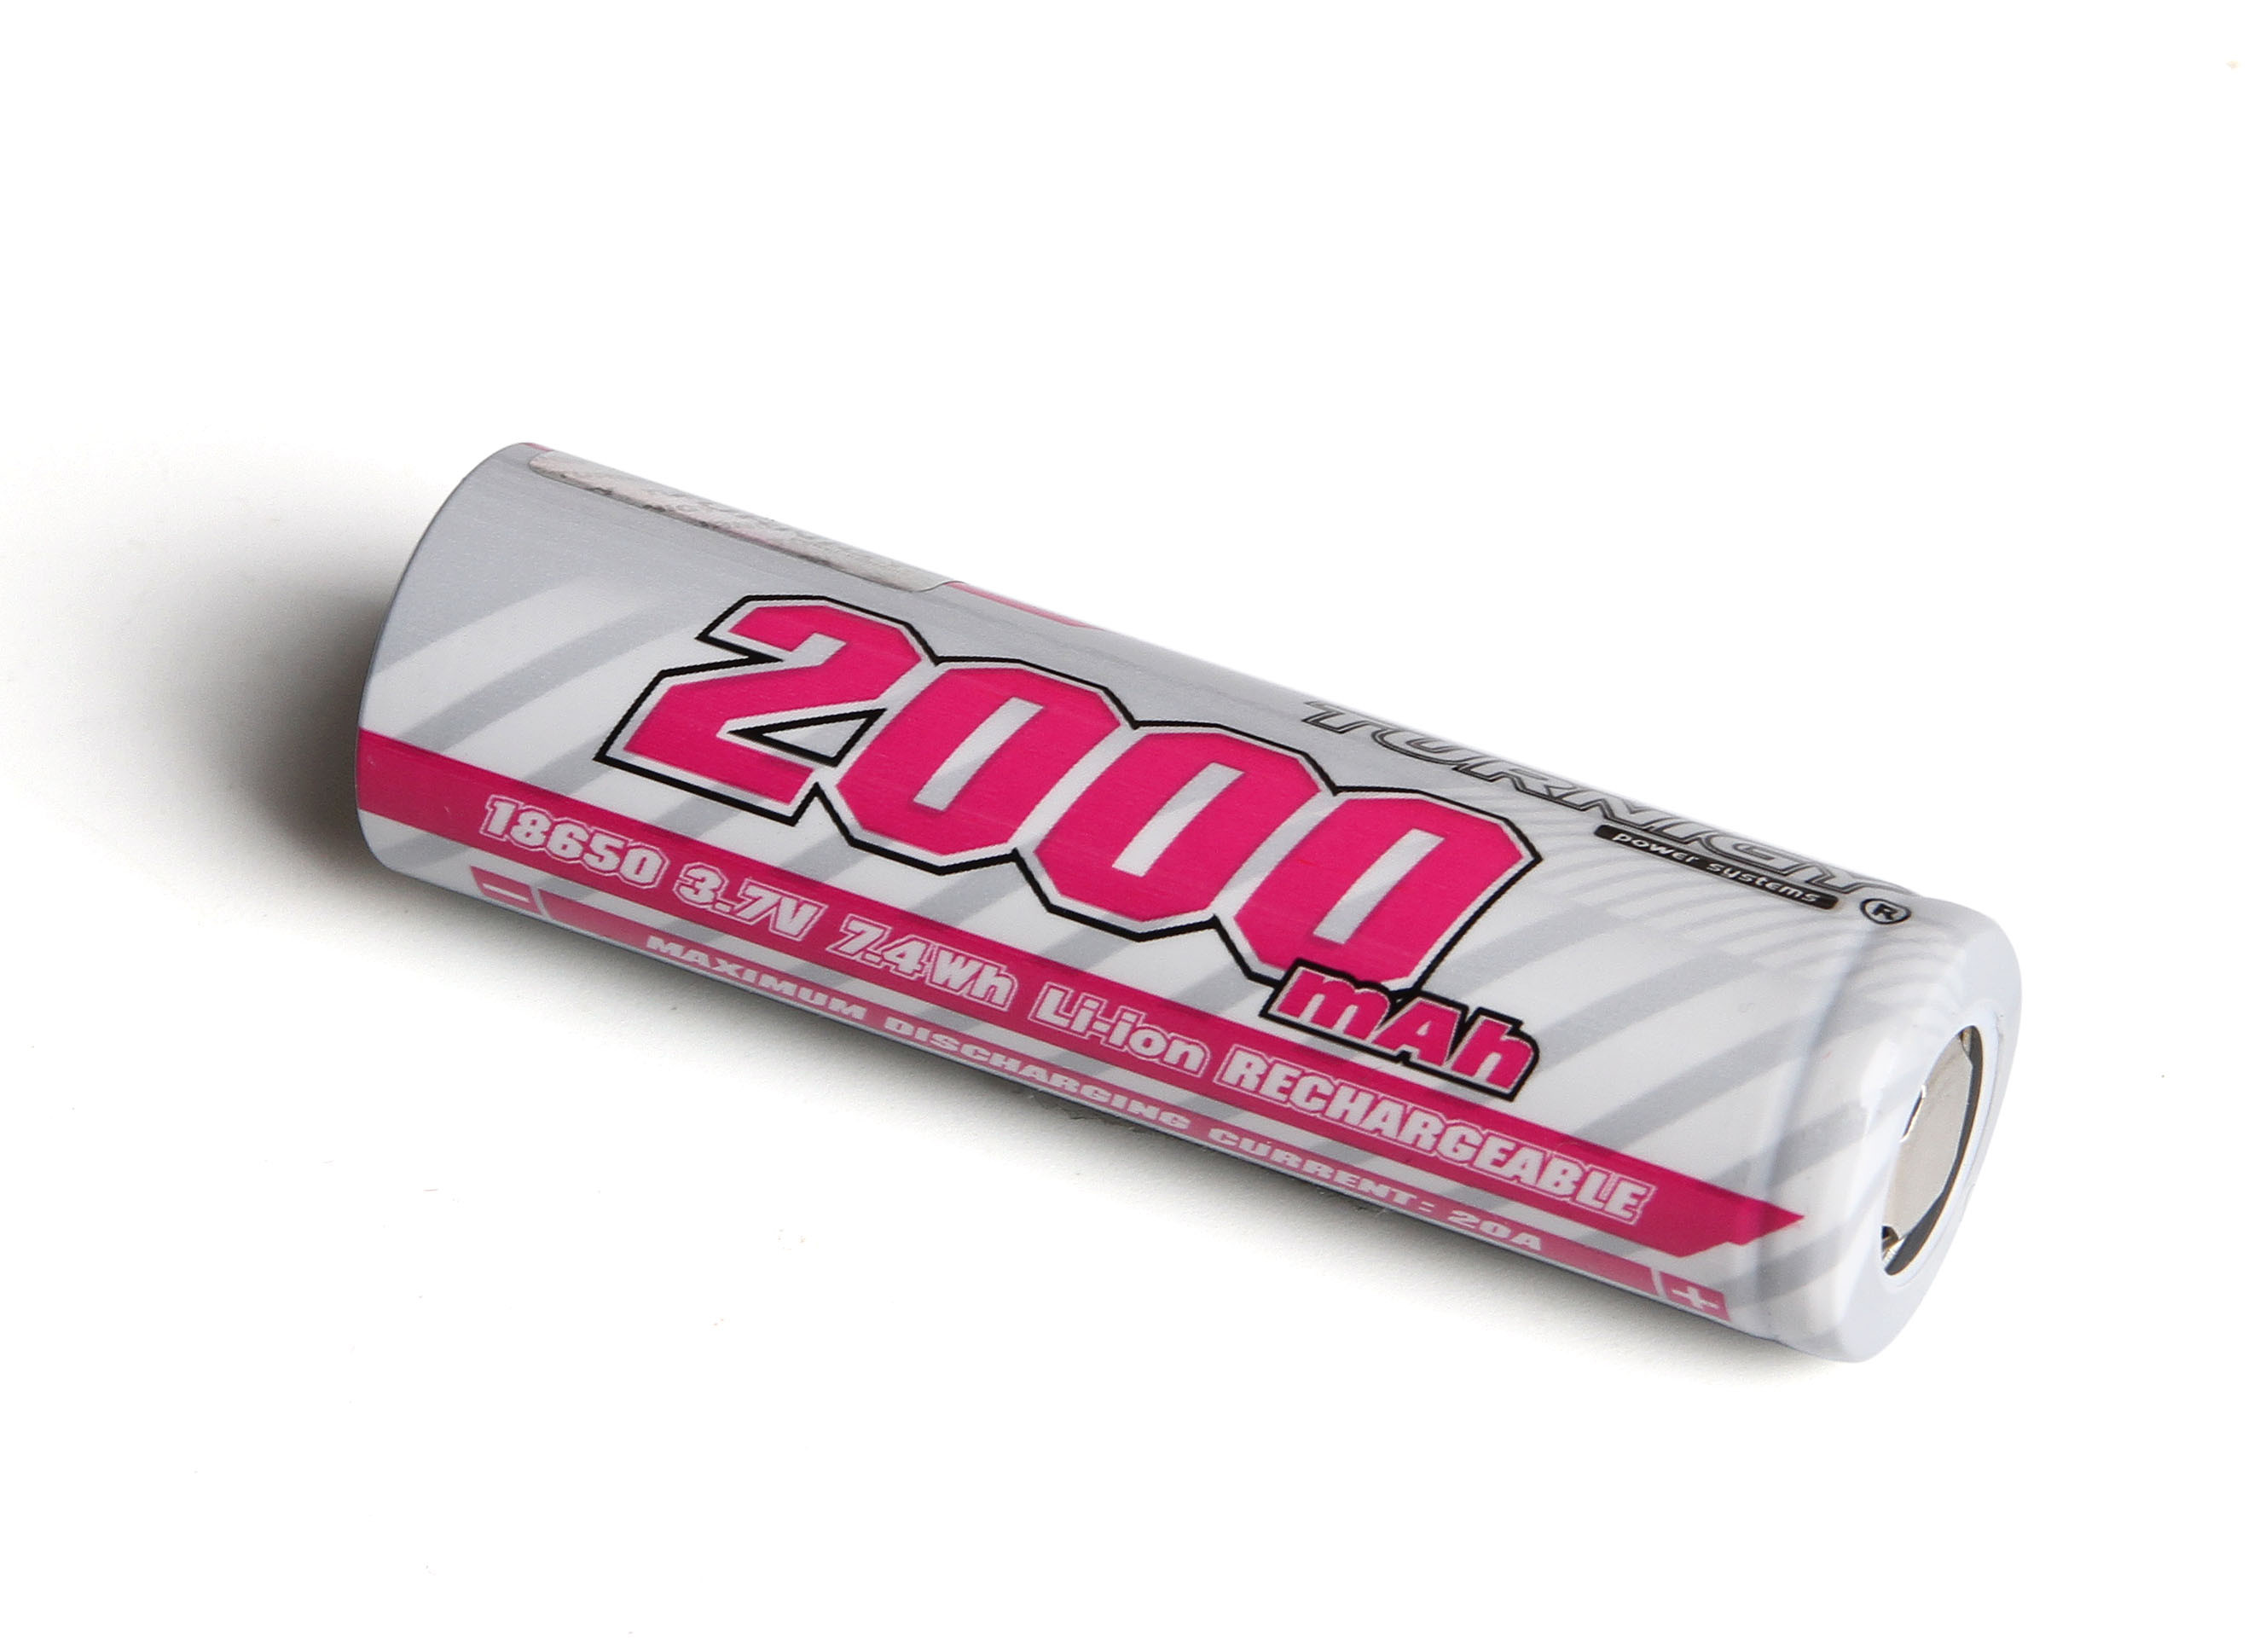 18650 Li-ion 3.7V 2000mAh 7.4WH Rechargeable Battery (Pack Of 6